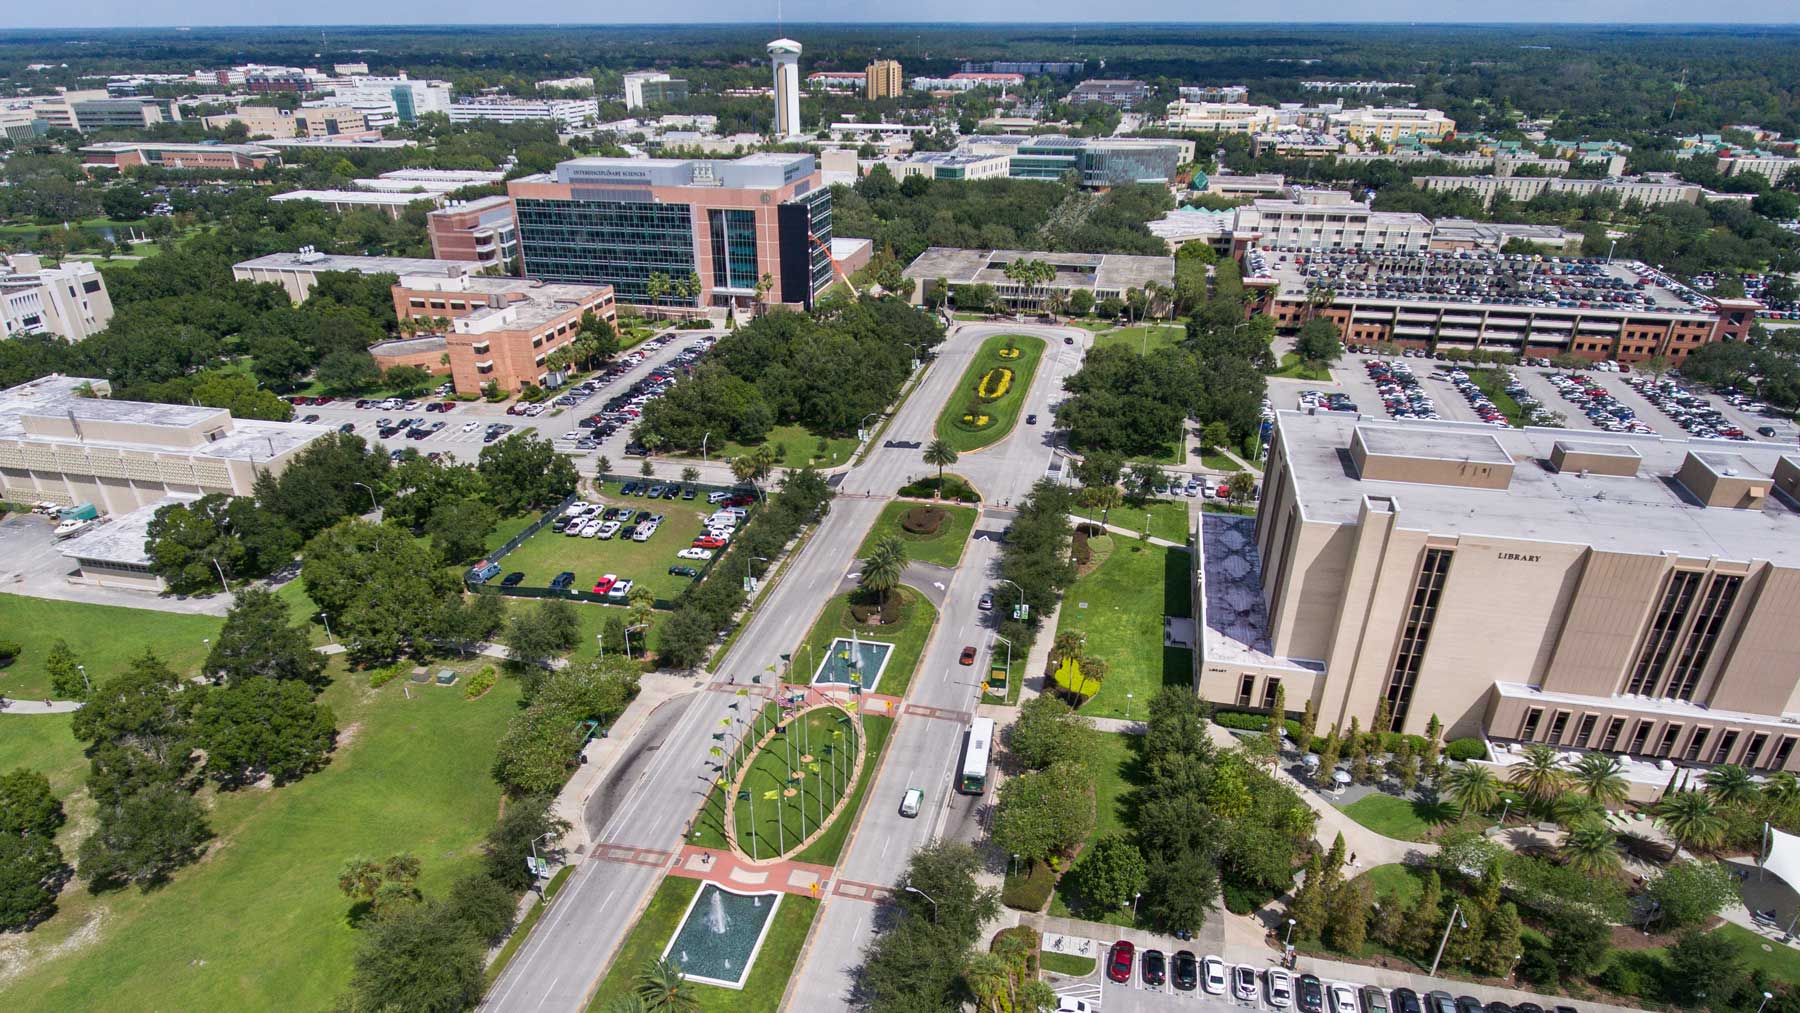 Aerial view of USF campus in Tampa